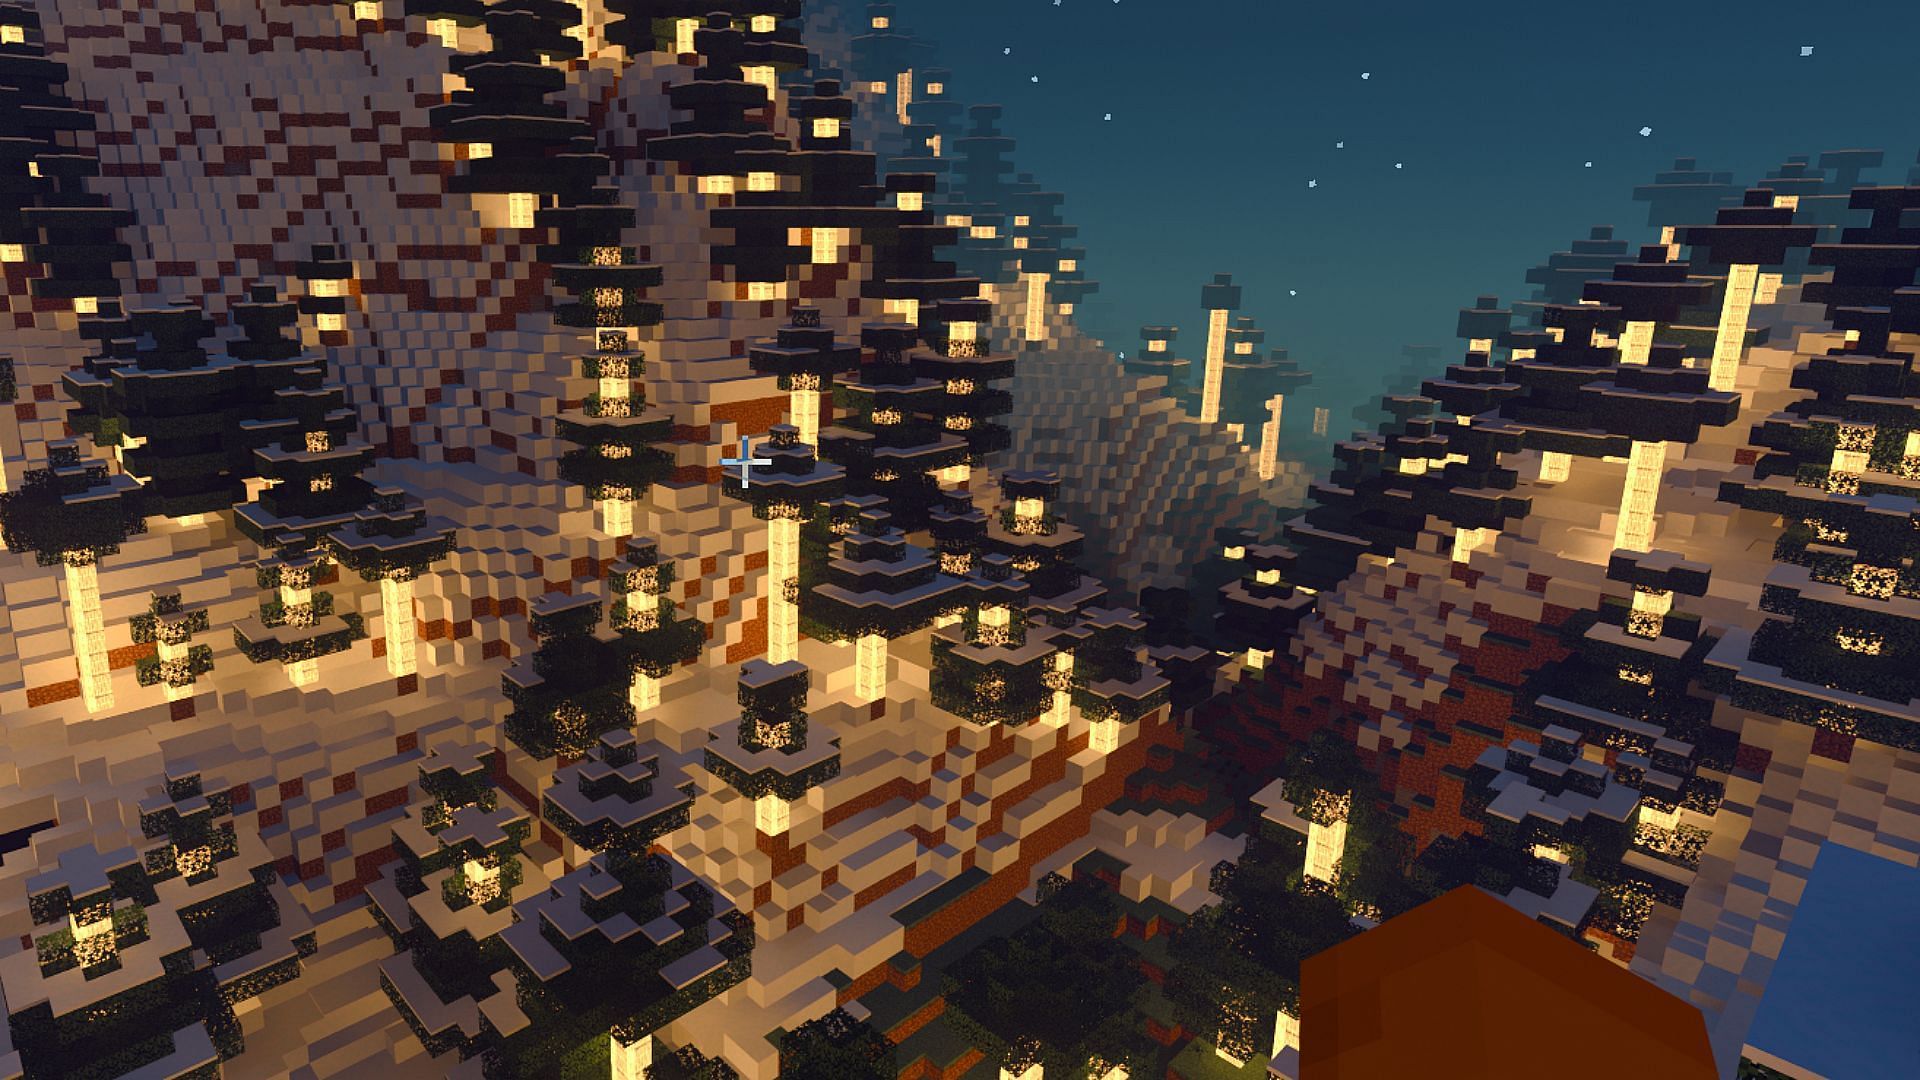 Minecraft Redditor discovers unexpected light glitch and creates beautiful glowing trees with it (Image via Reddit/u/MC-874)